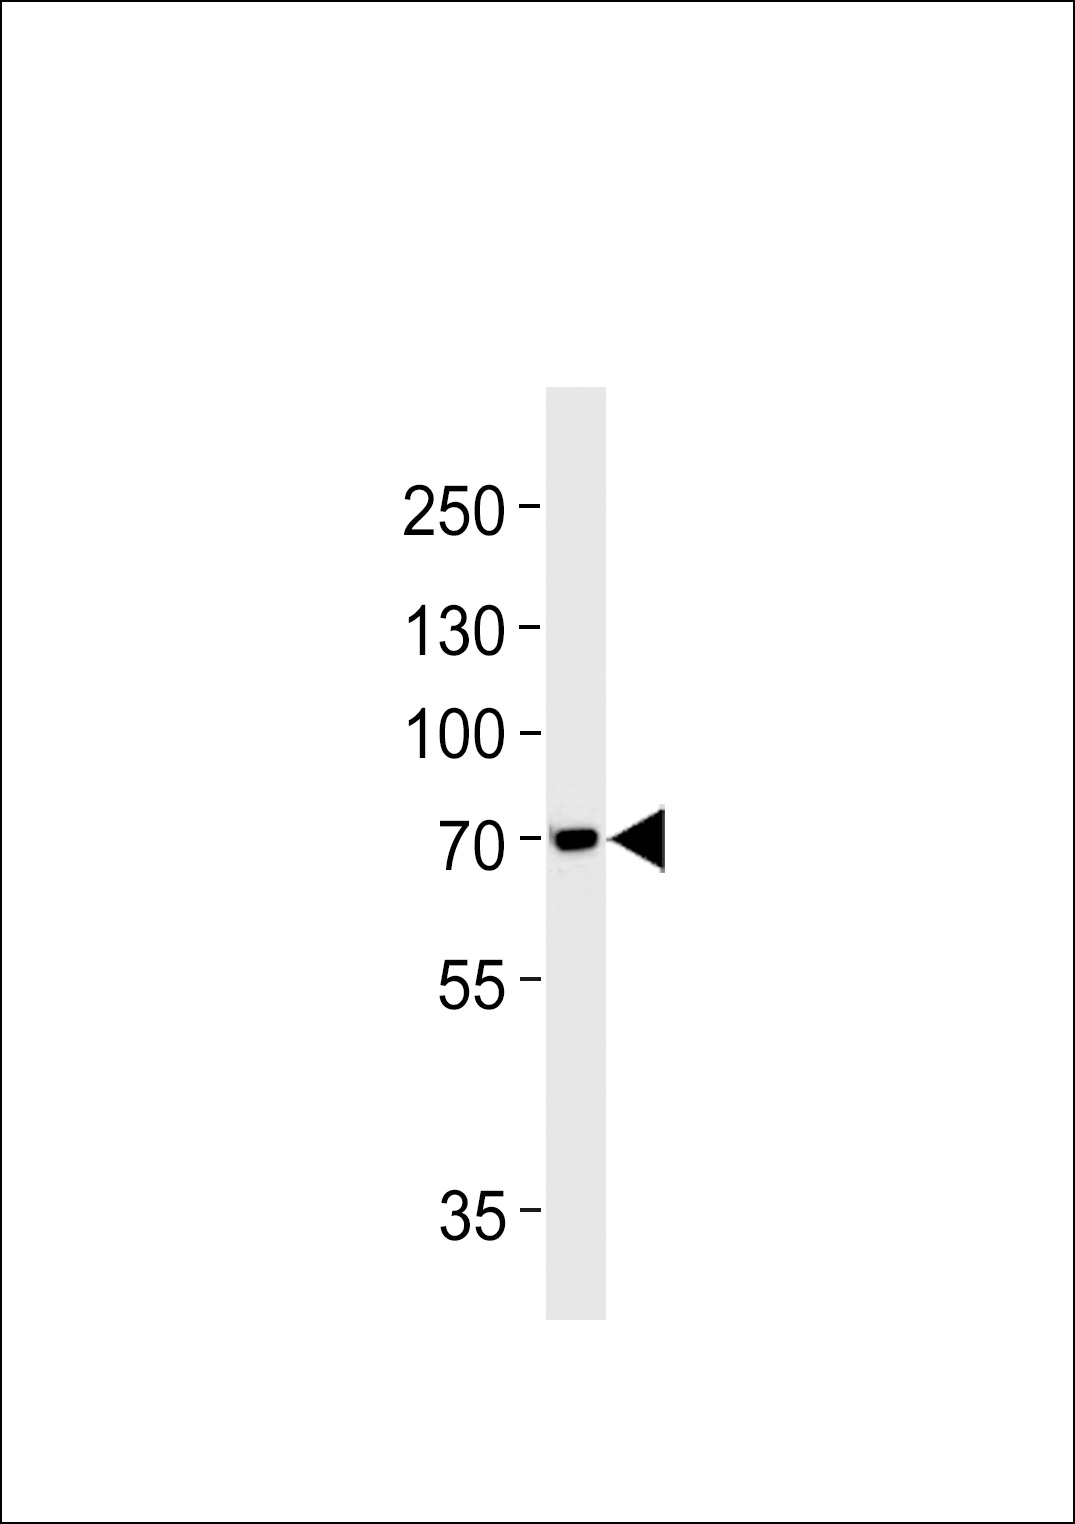 MAPT Antibody (pS720) (Cat.# AP1425c) western blot analysis in SH-SY5Y cell line lysates (35ug/lane).This demonstrates the MAPT antibody detected the MAPT protein (arrow).